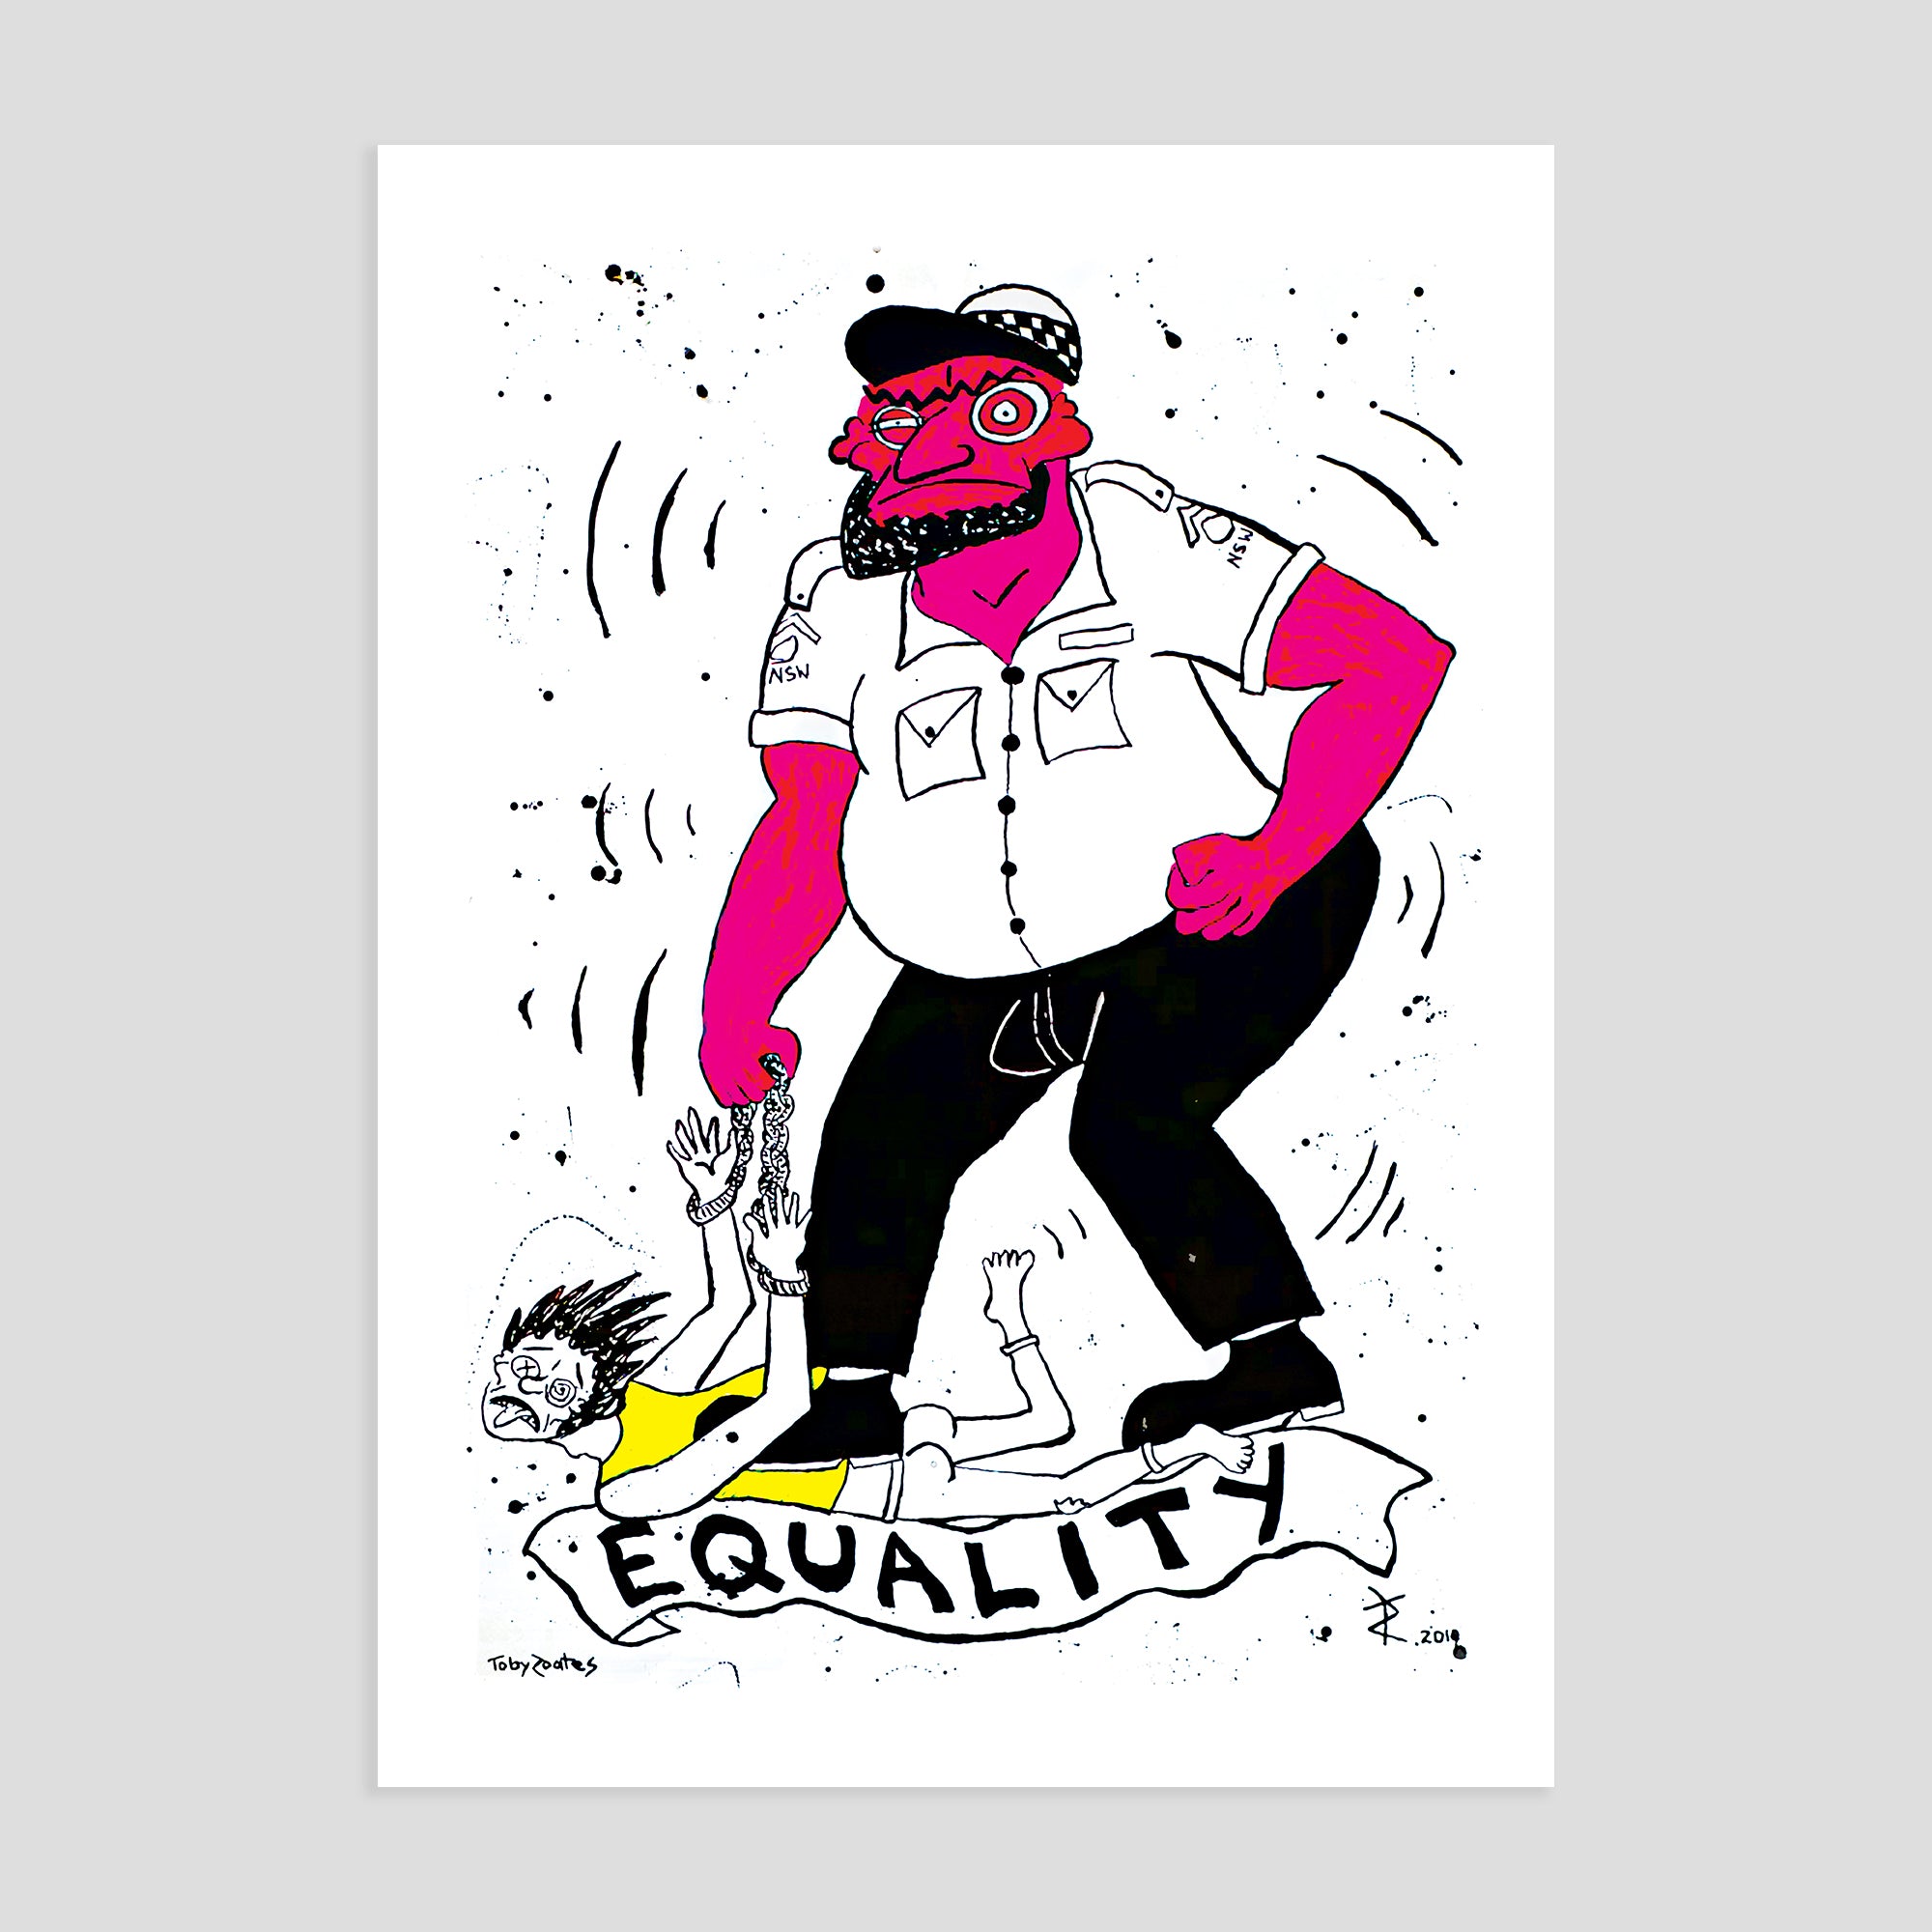 TOBY ZOATES 'EQUALITY' 2019 - PRINT